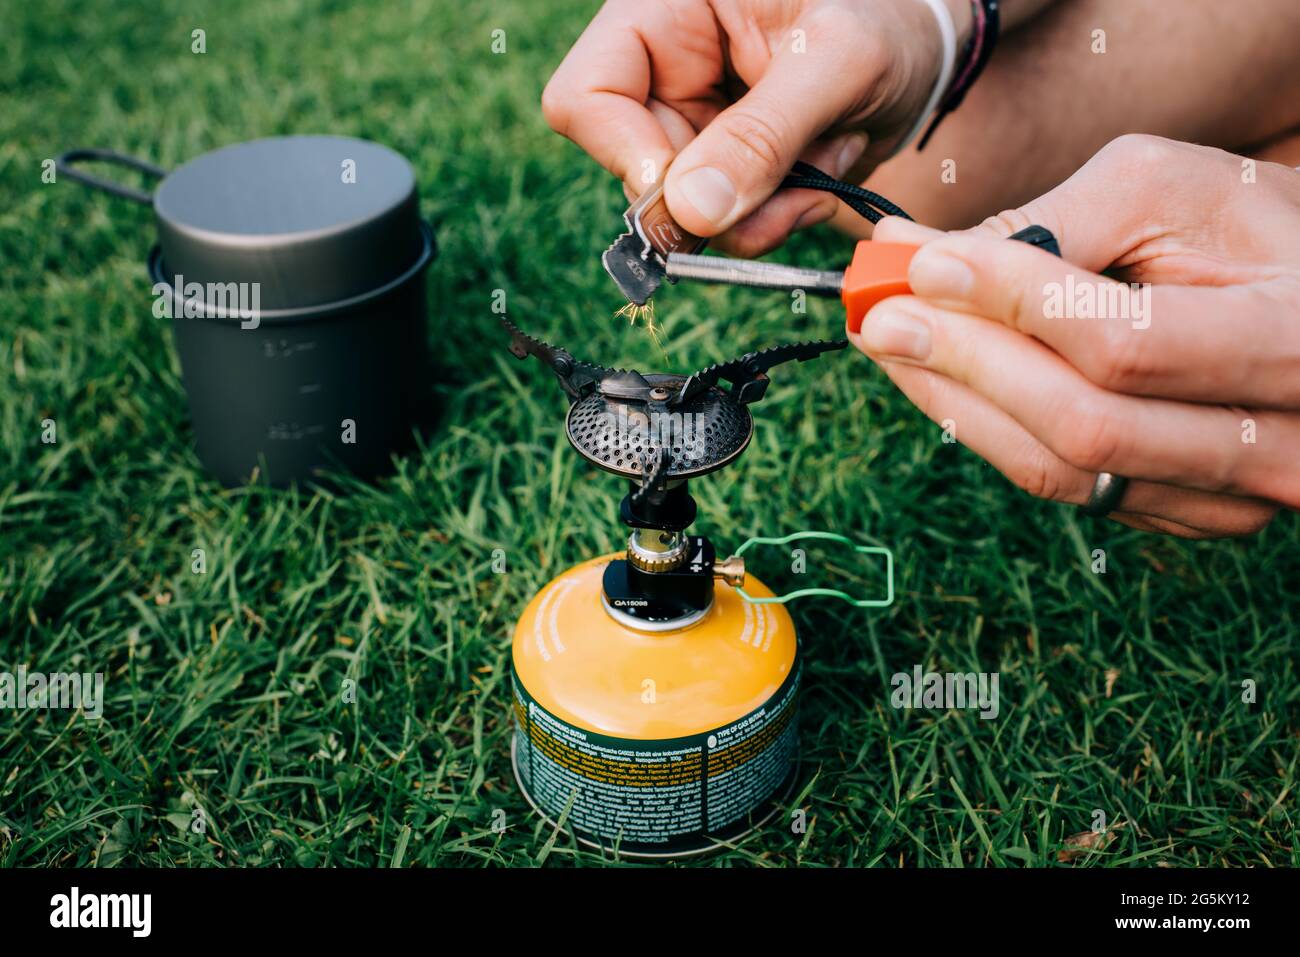 man lighting a portable stove on a campsite Stock Photo